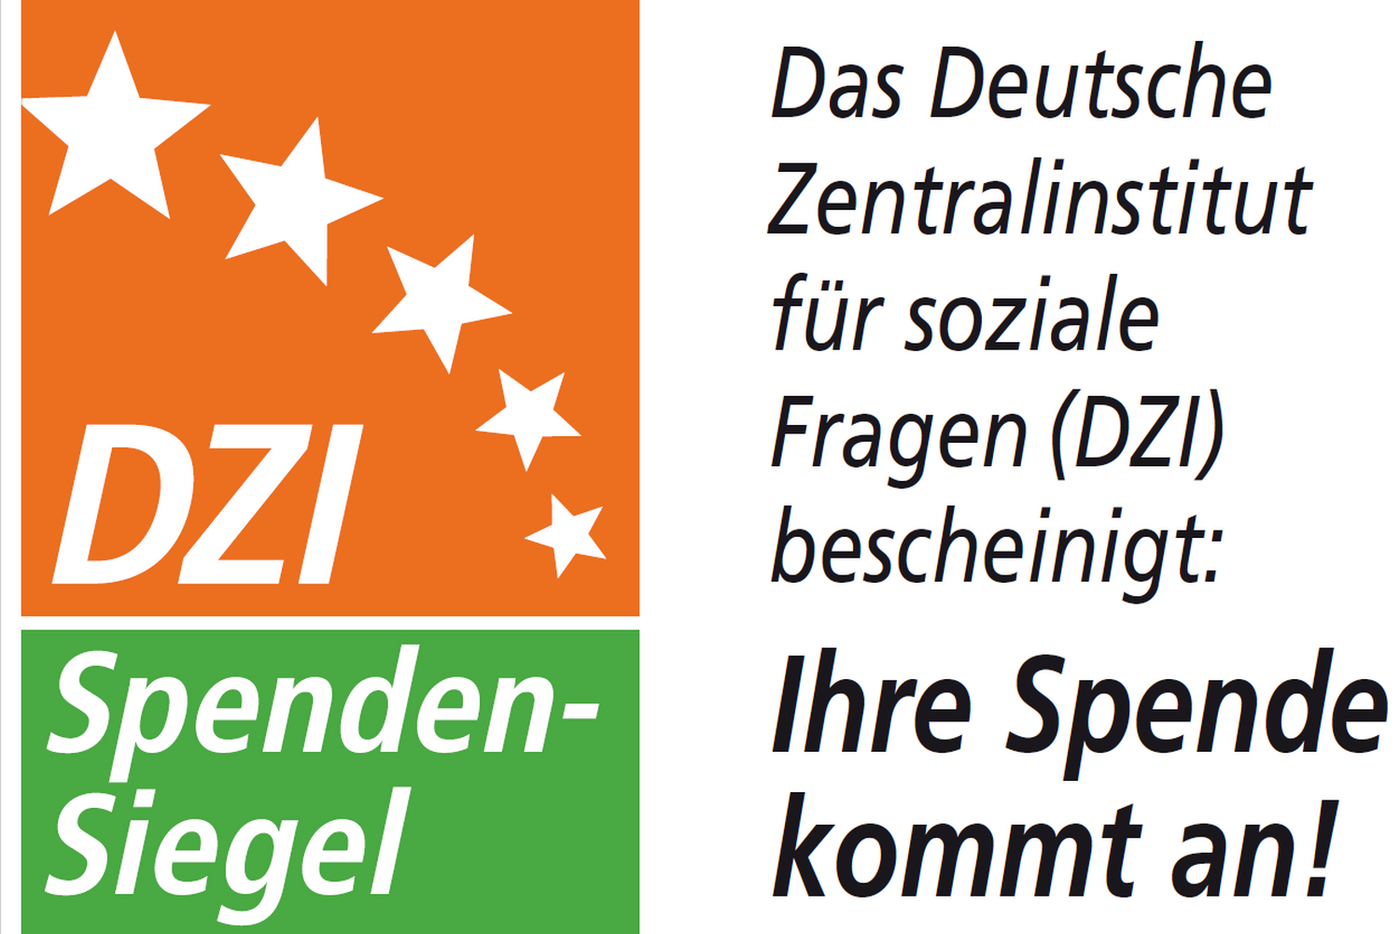 Logo of the German Central Institute for Social Issues: Your donation reaches its destination!